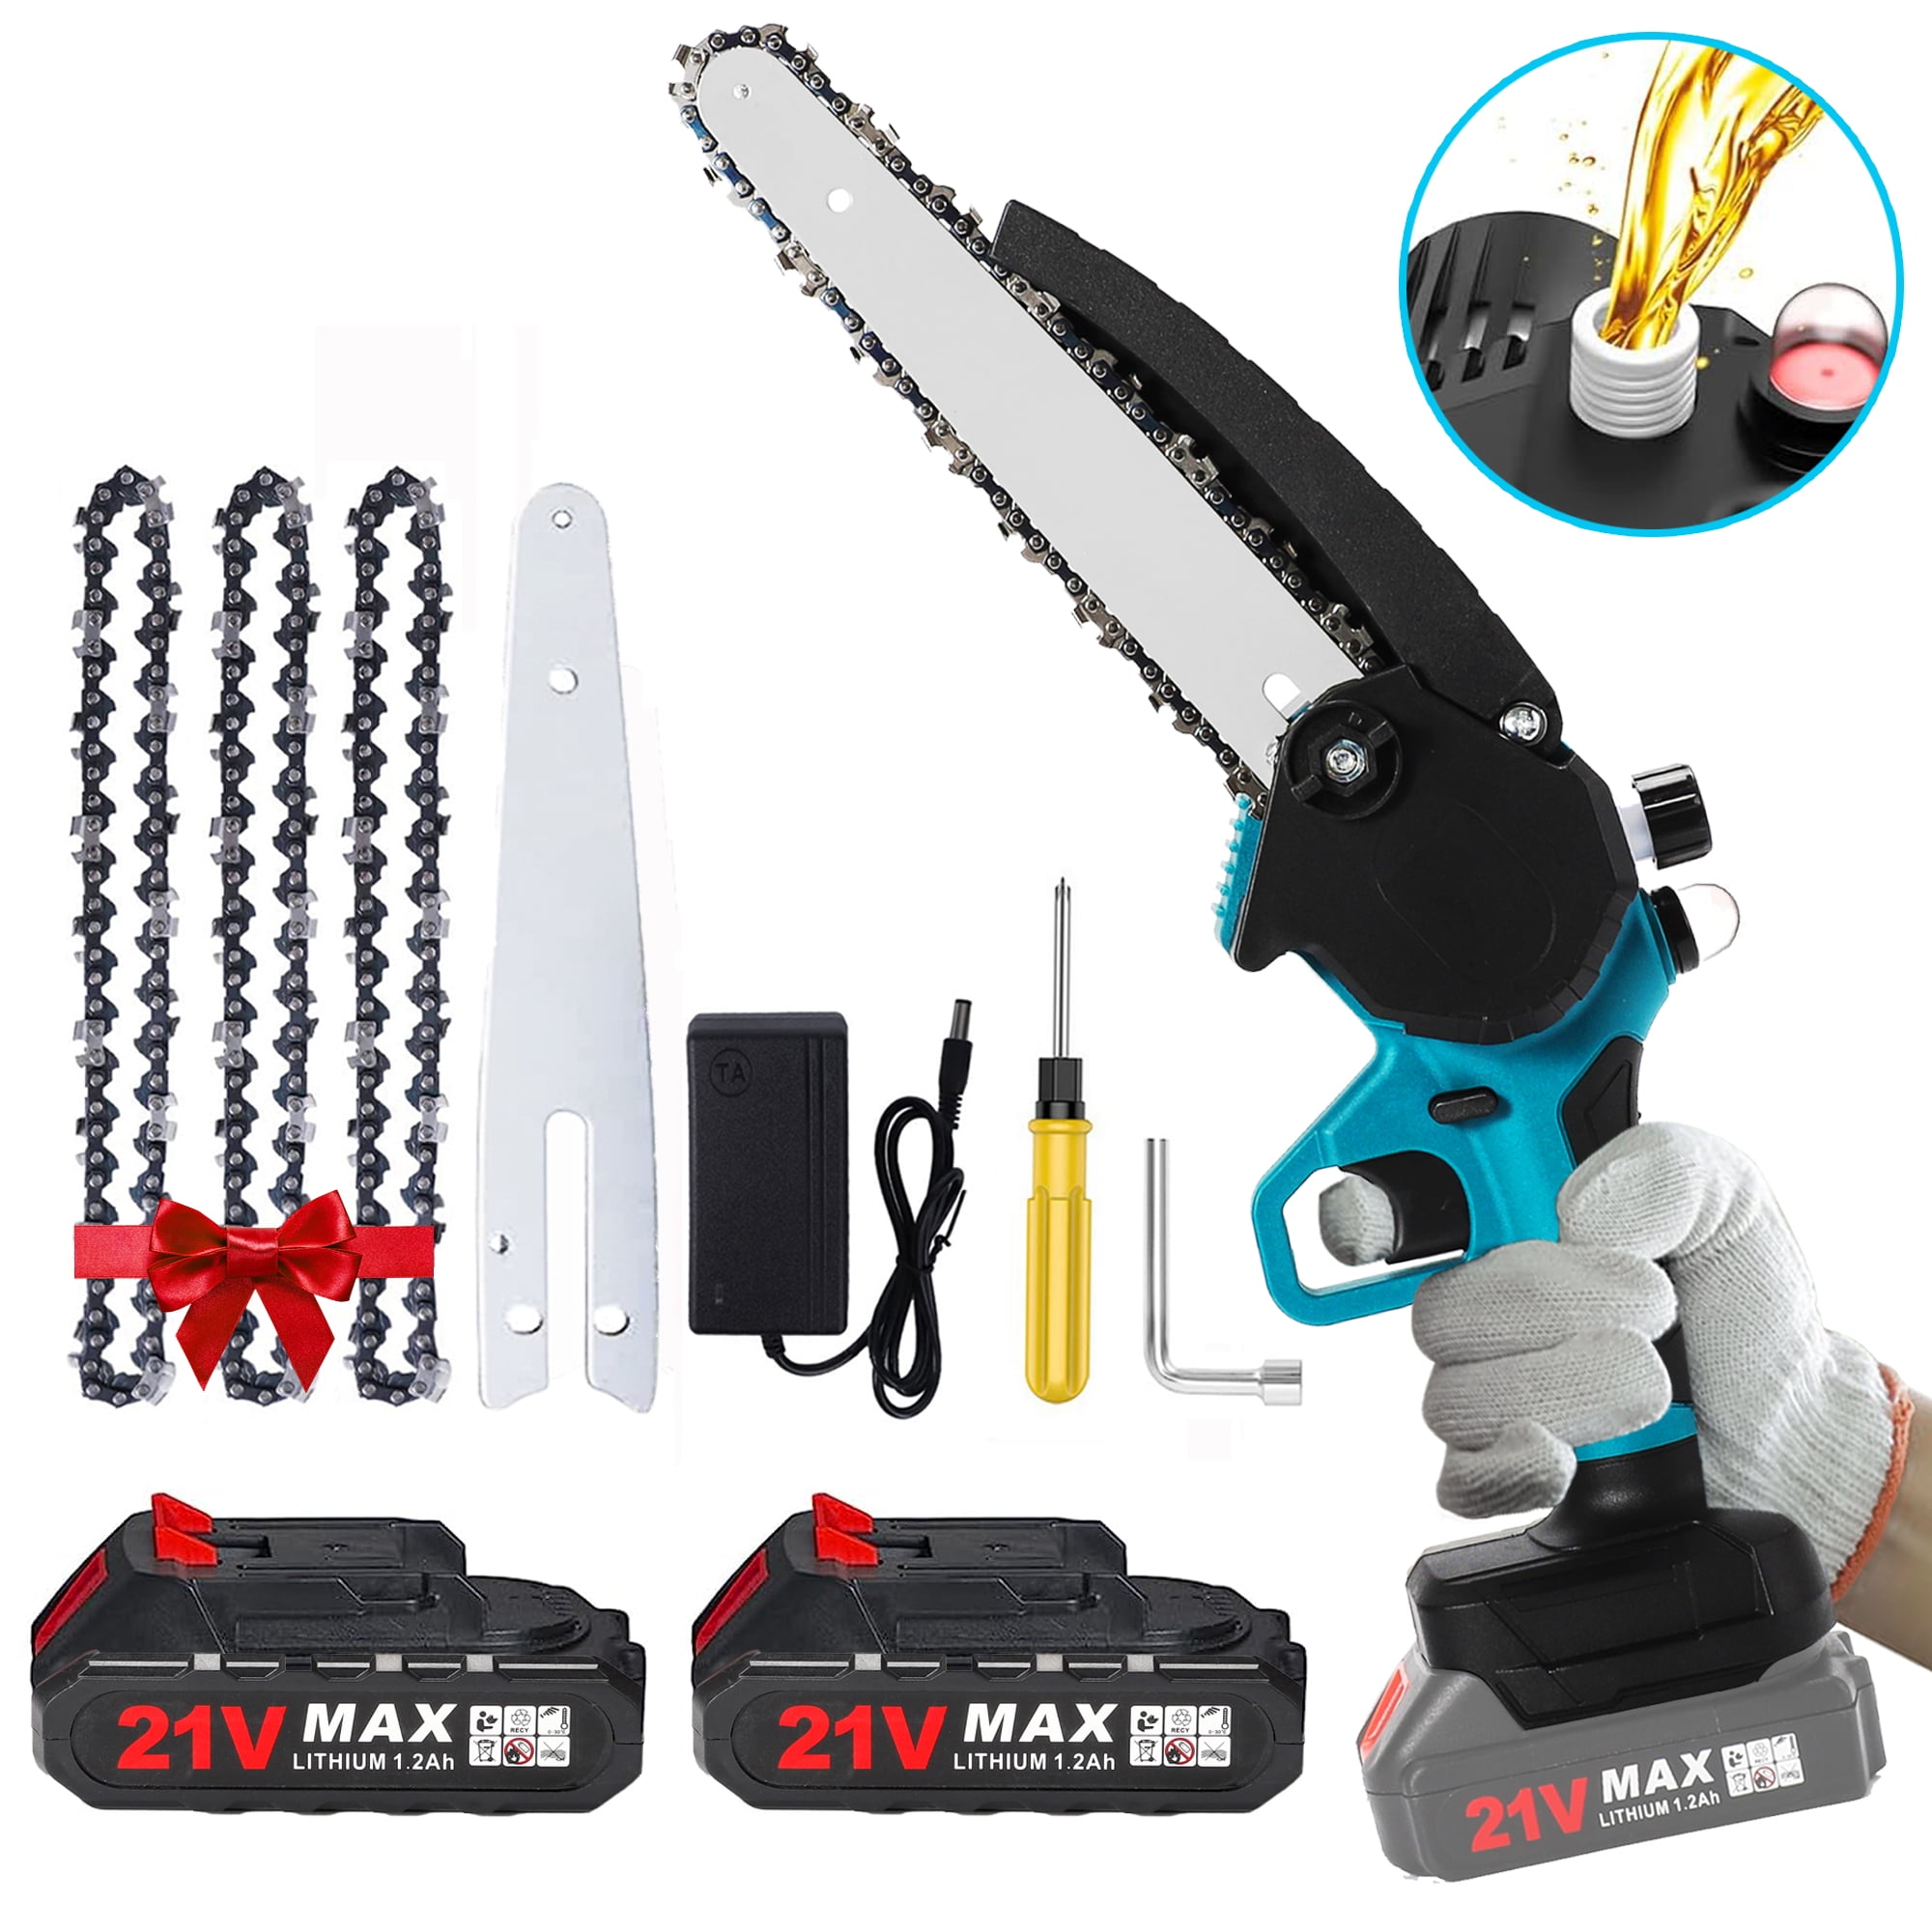 4 REASONS WHY ELECTRIC CHAINSAWS ARE IDEAL FOR TREE PRUNING PROJECTS